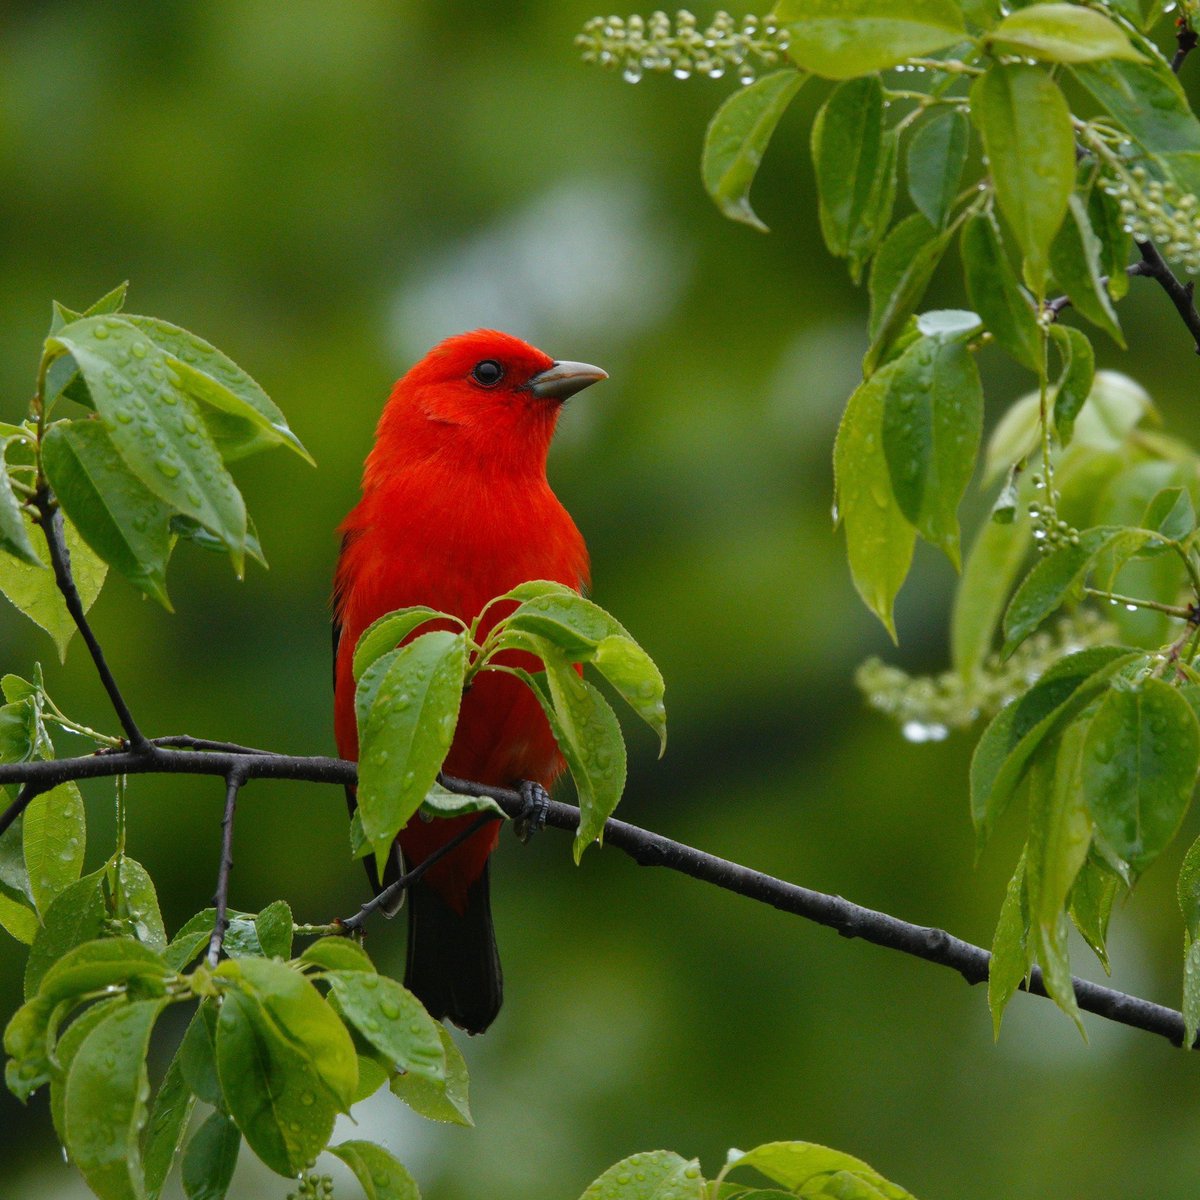 Even a wet, grey, Monday can’t diminish his vibrancy. Scarlet Tanager #scarlettanager #tanager #birding #birdphotography #songbirds #springmigration #natgeo #centralpark #wildlifephotography #shotoftheday #birdwatching #birdcp #birdcpp #birds #birdphotos #natgeowild #nyc